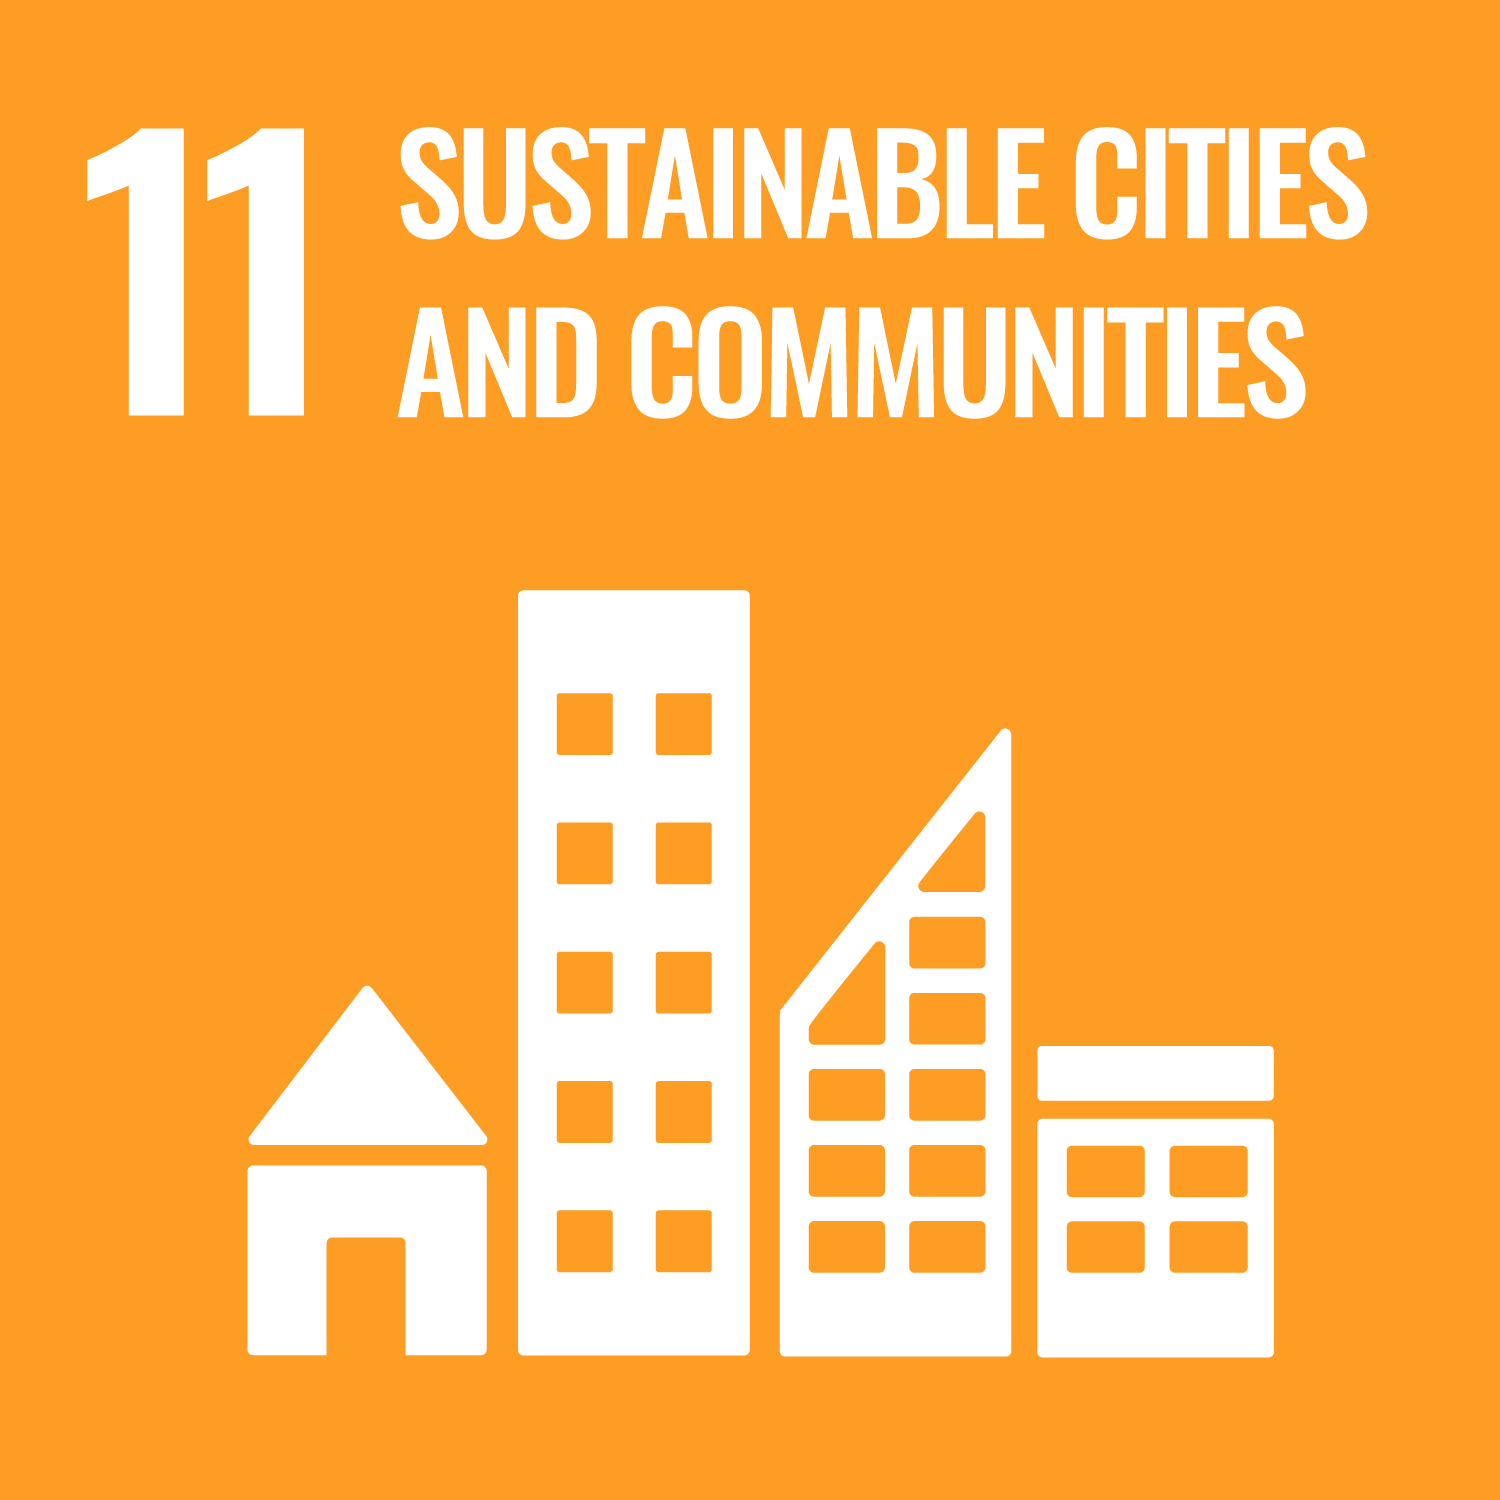 sustainable-cities-and-communities-sustainability-goal